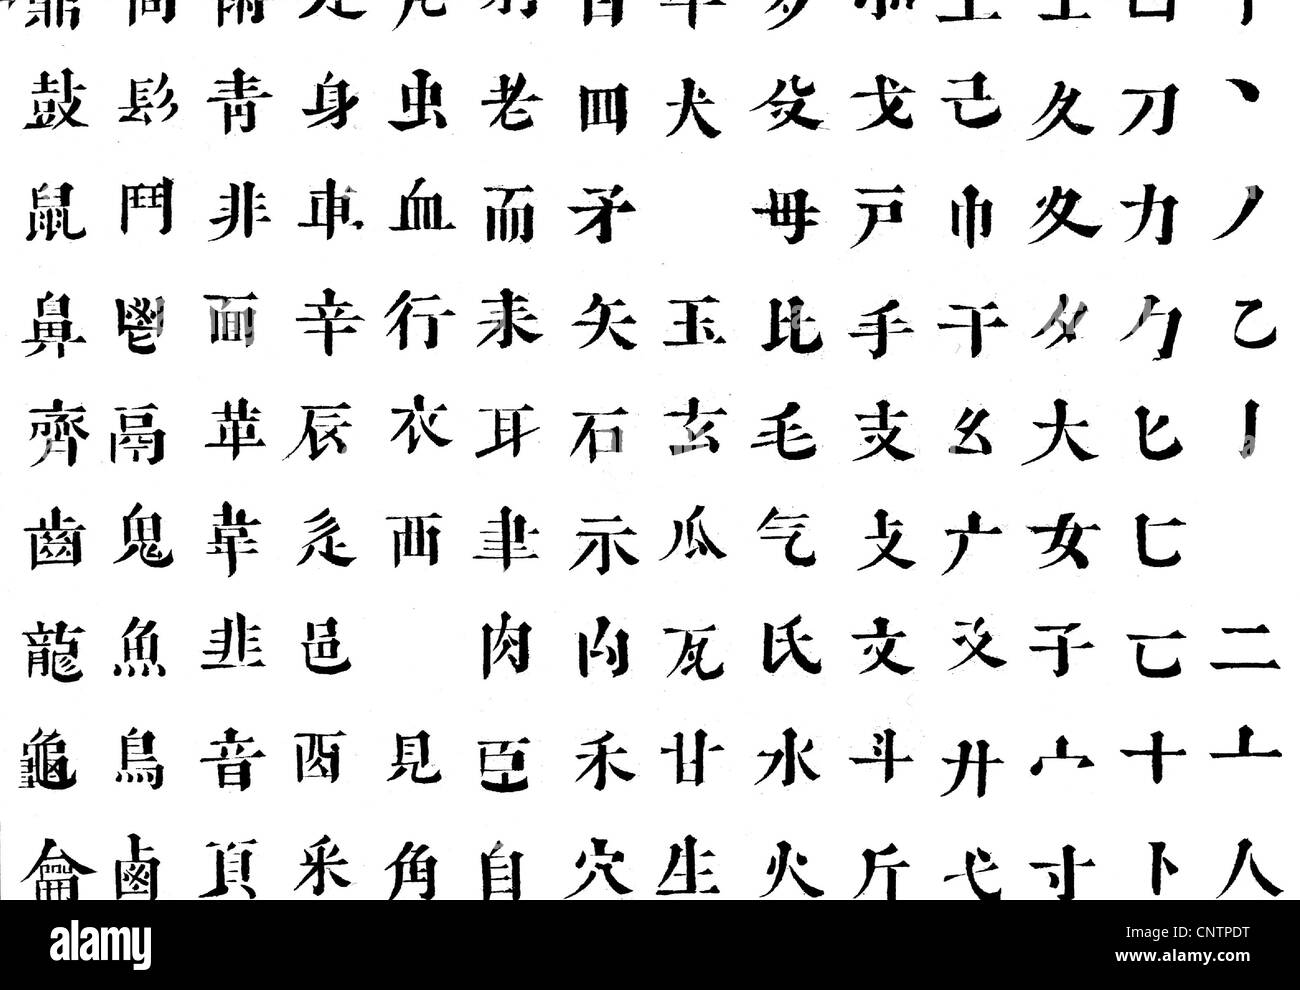 script, Chinese characters, excerpt from the Chinese alphabet, alphabetic character, China, historic, historical, Additional-Rights-Clearences-Not Available Stock Photo